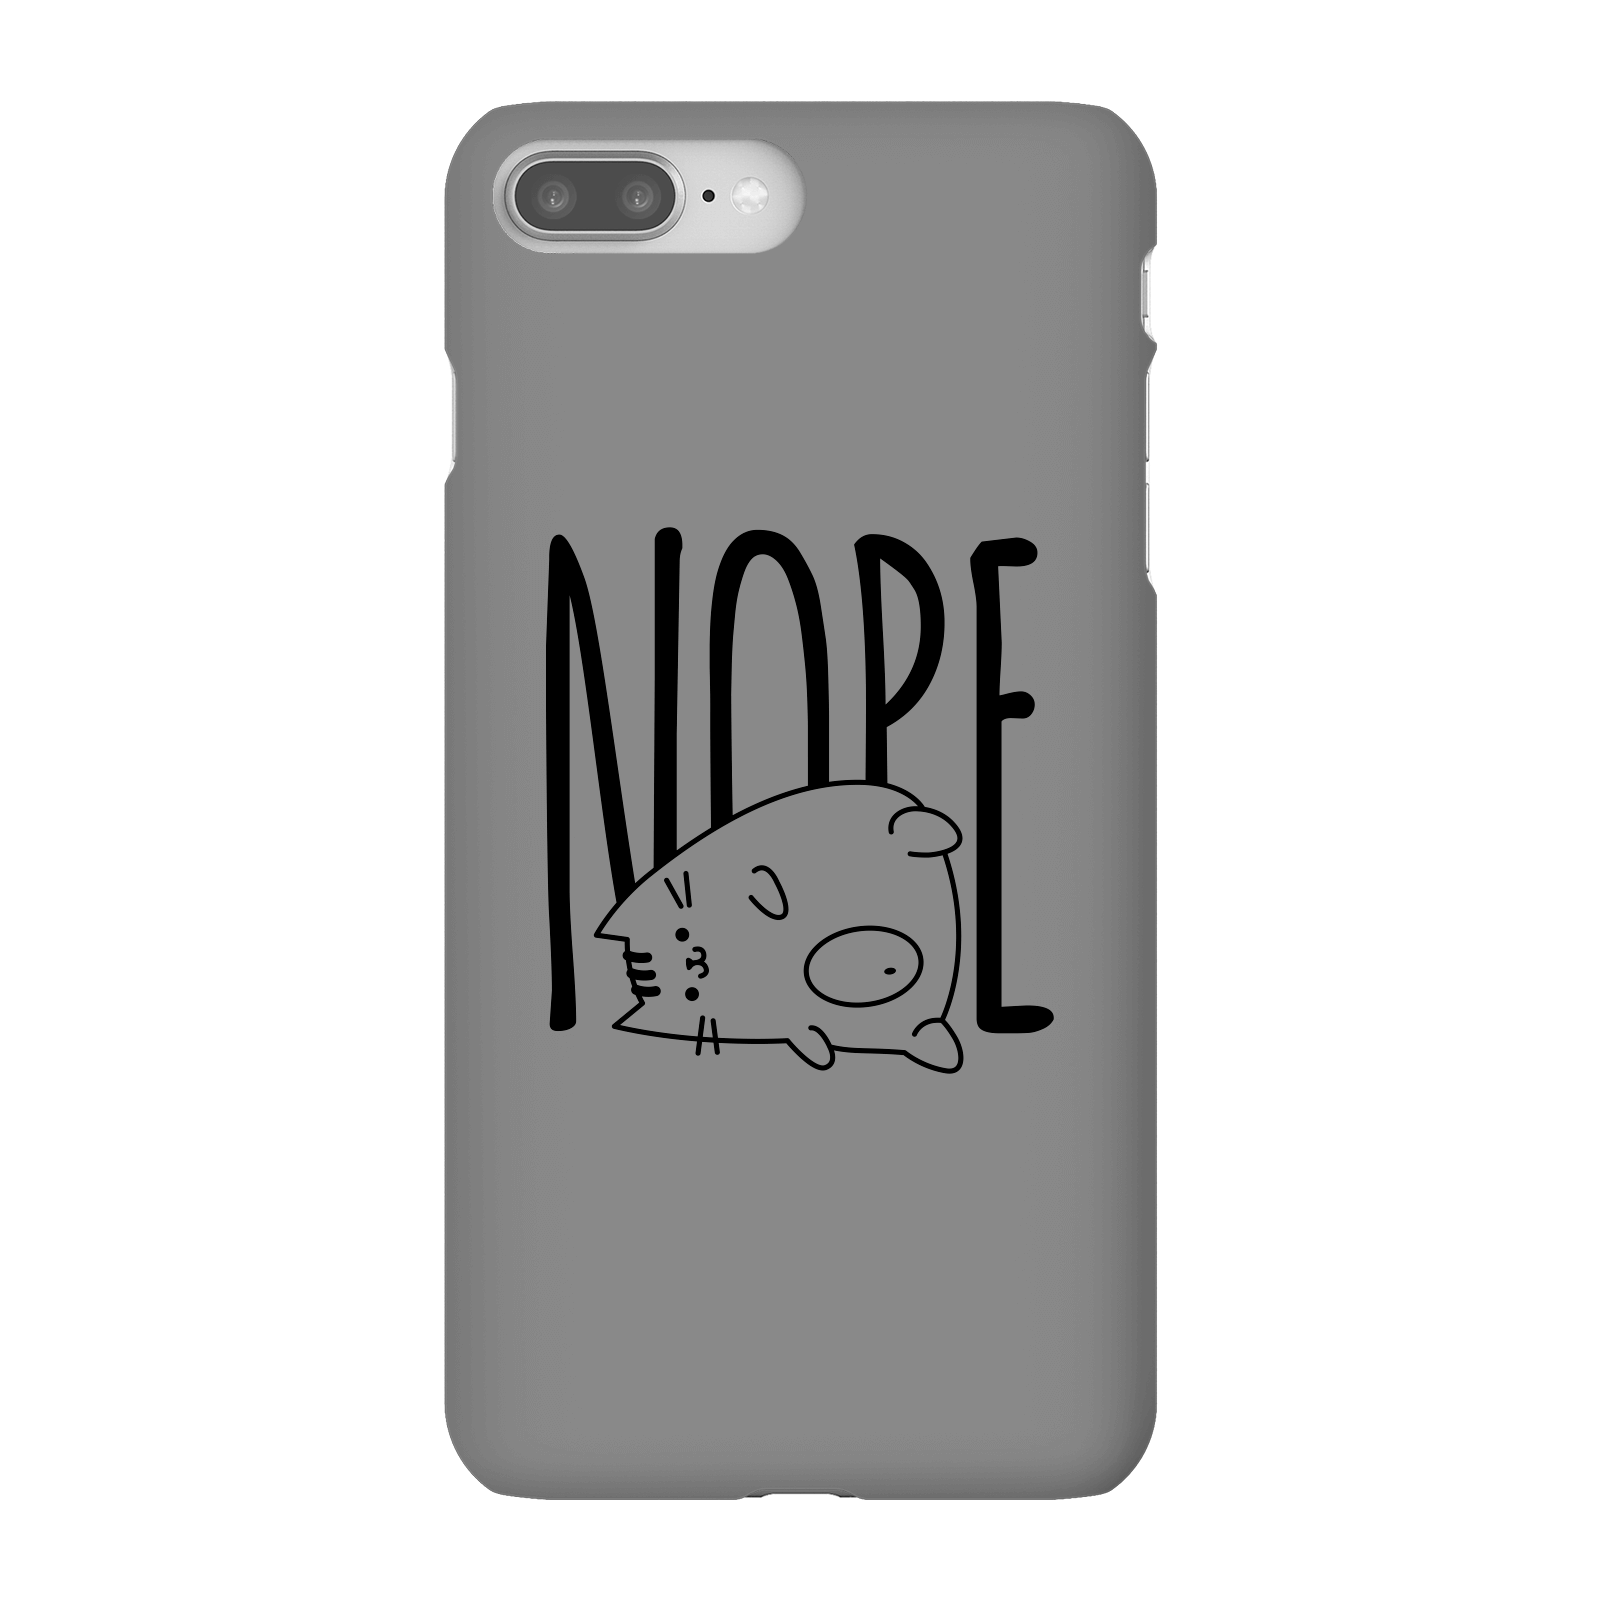 Nope Phone Case for iPhone and Android - iPhone 8 Plus - Snap Case - Gloss